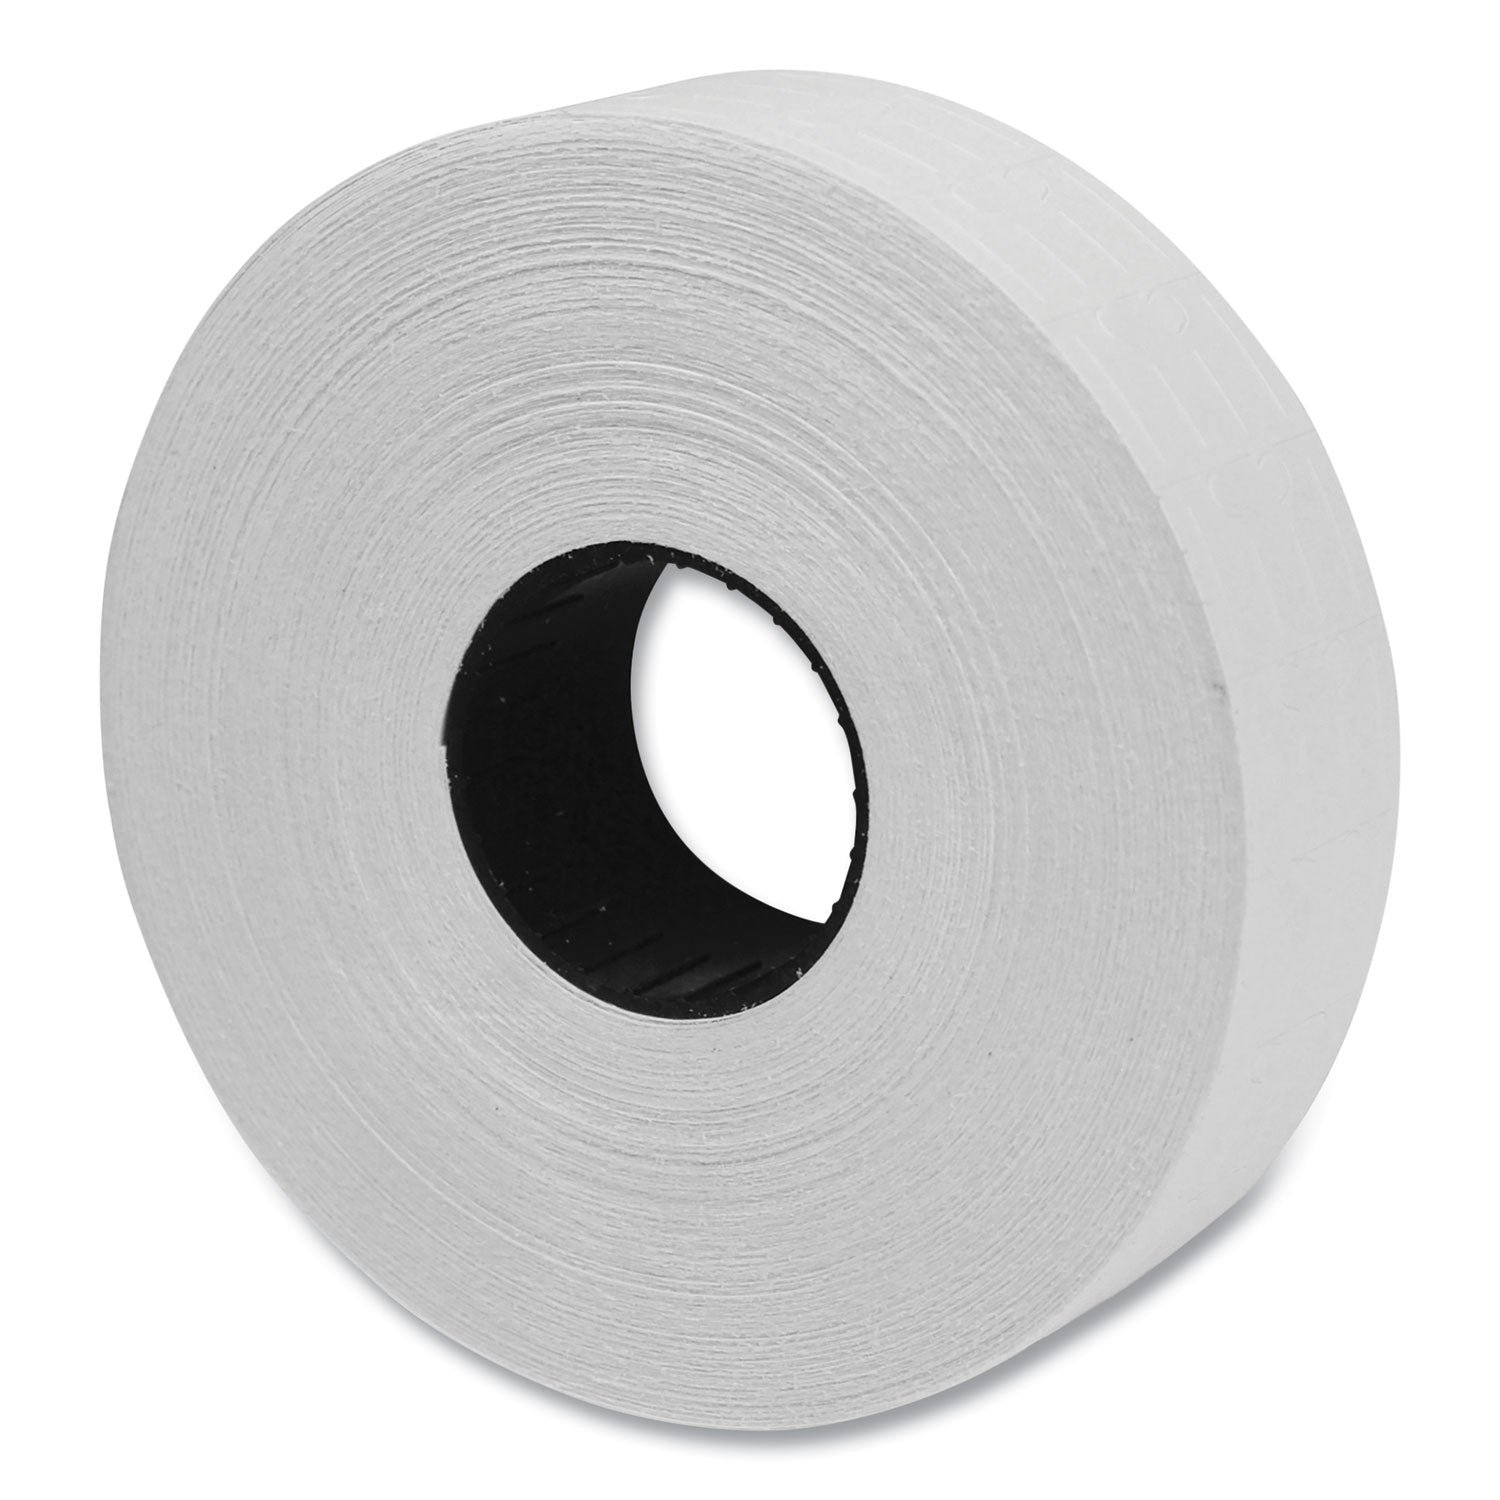 one-line-pricemarker-labels-white-2500-labels-roll_grv098612 - 1